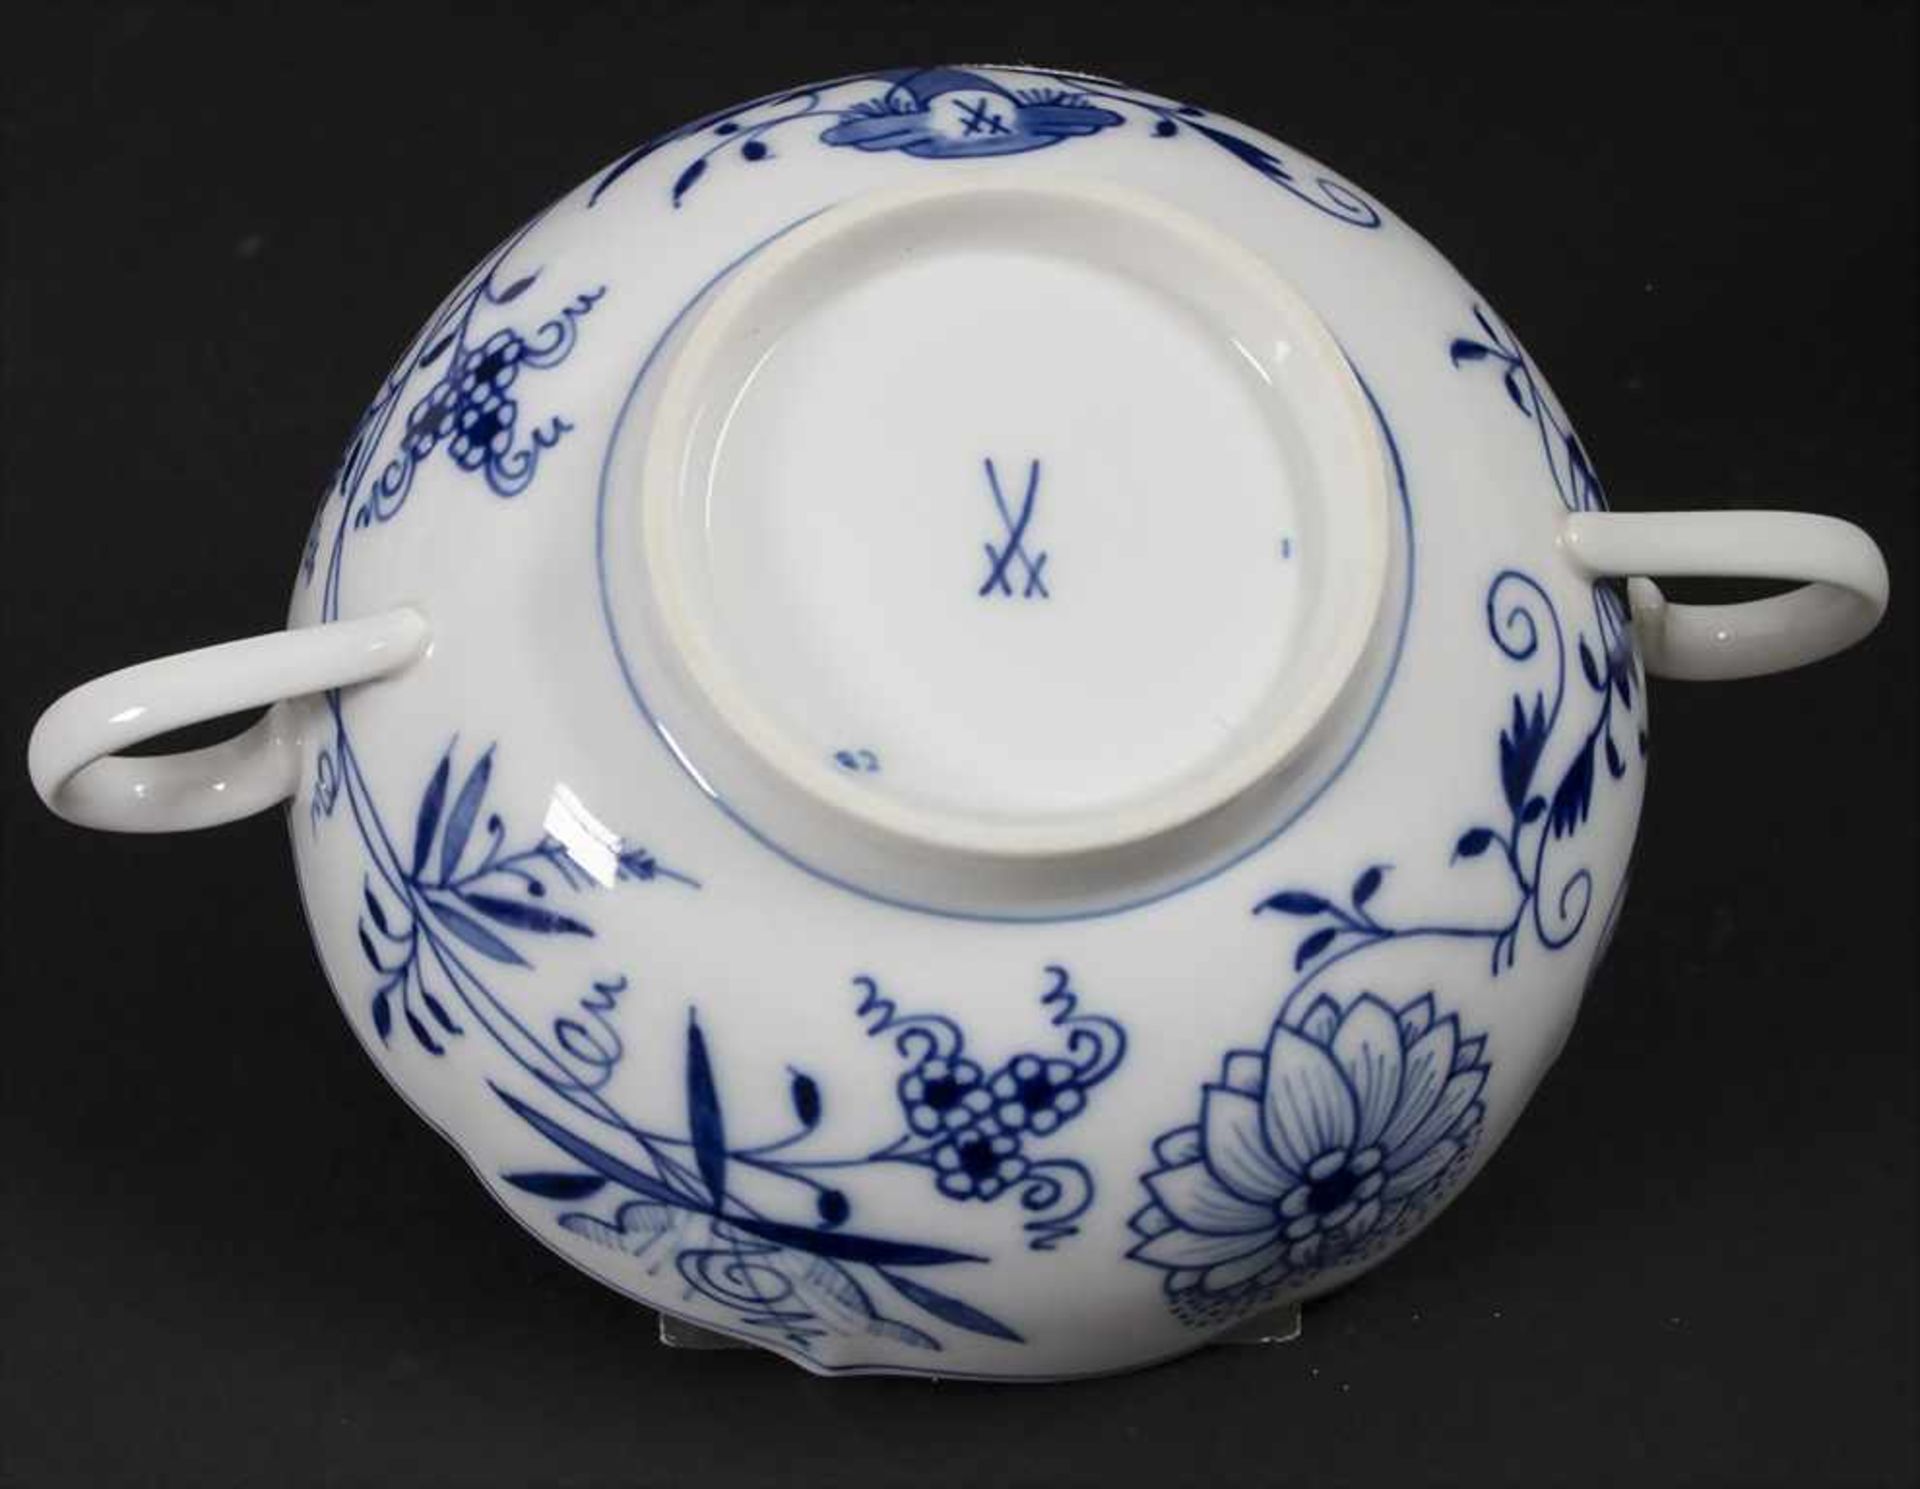 28 tlg. Service 'Zwiebelmuster' / A 28-piece dinner set with 'Onion Pattern', Meissen, 20. Jh. - Image 13 of 17